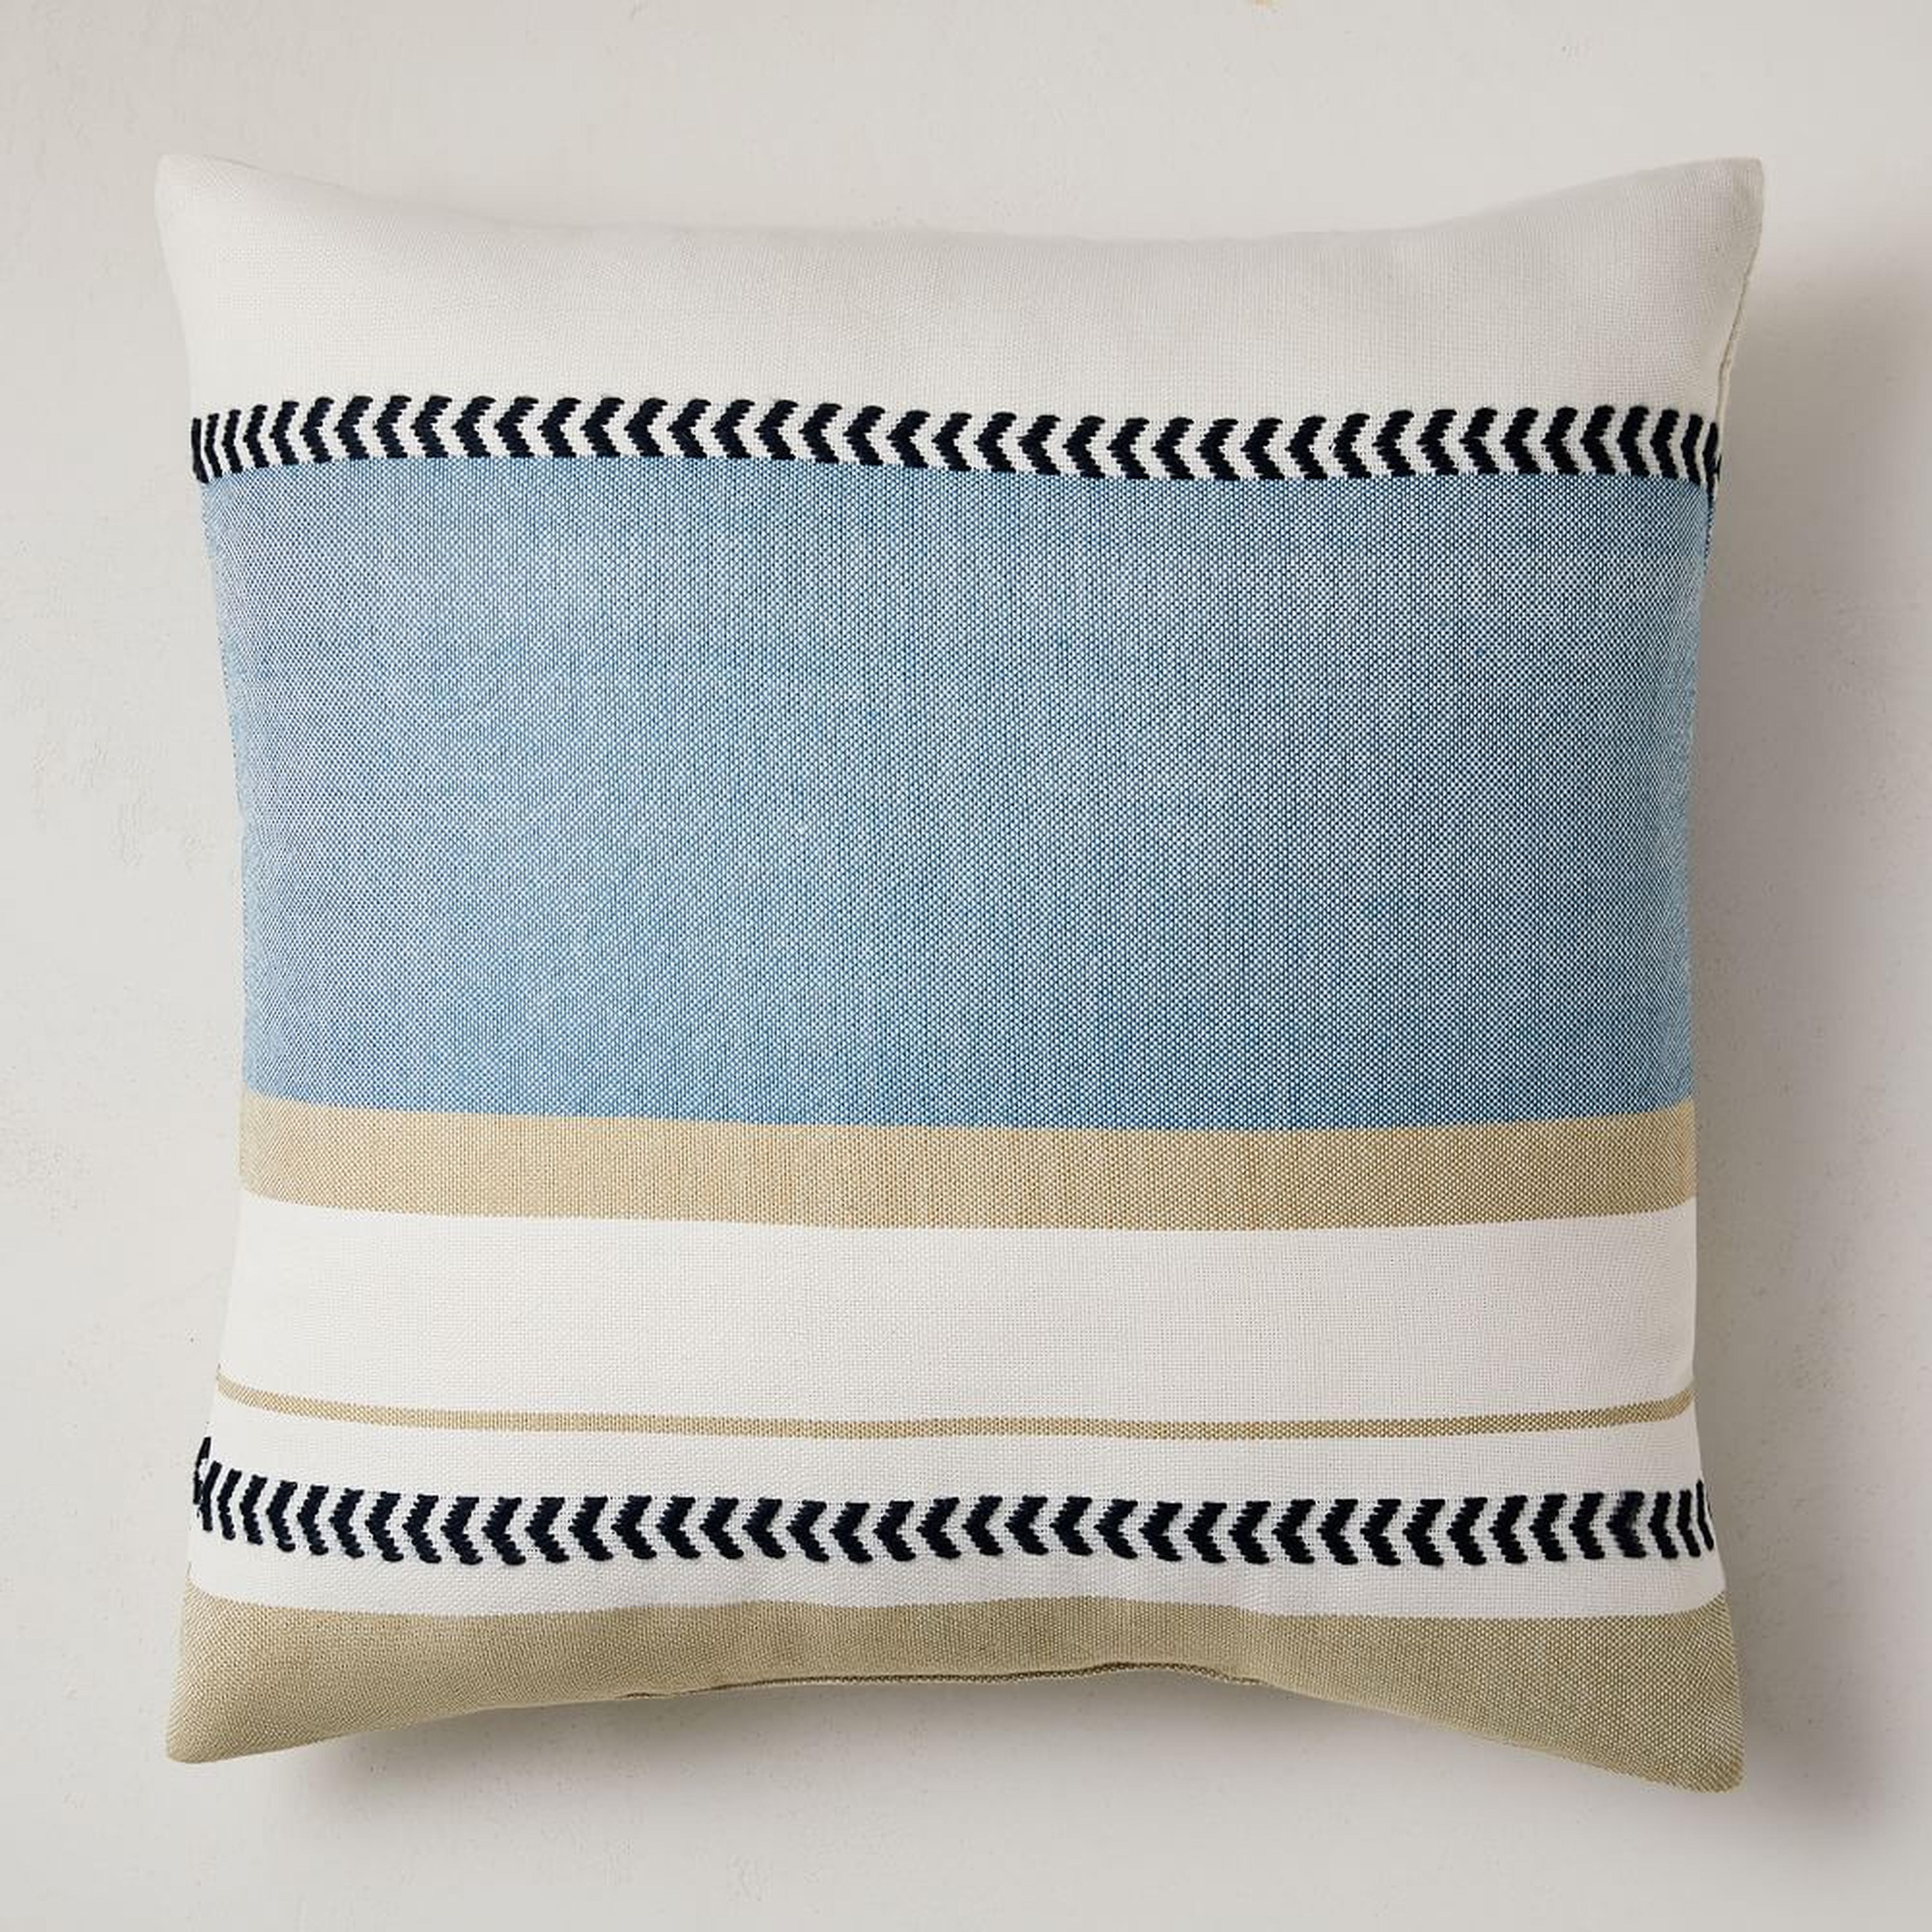 Outdoor Variegated Block Stripe Pillow, 20"x20", Washed Lagoon - West Elm